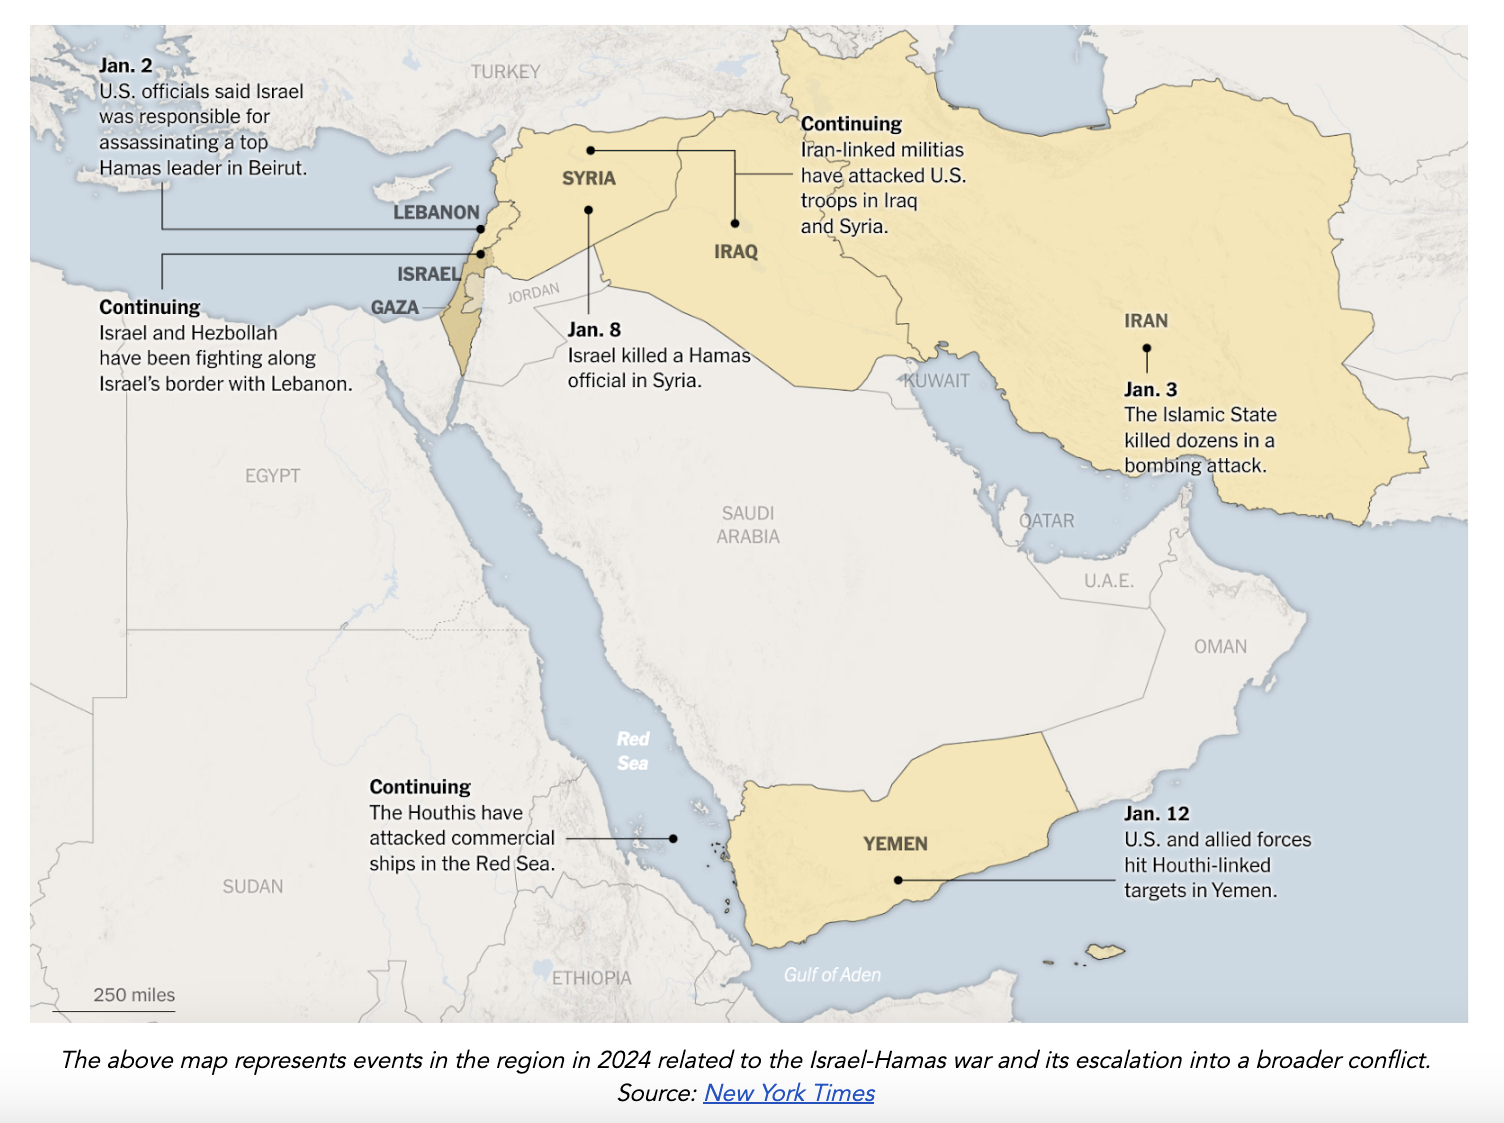 CONFLICT IN THE MIDDLE EAST REPORT